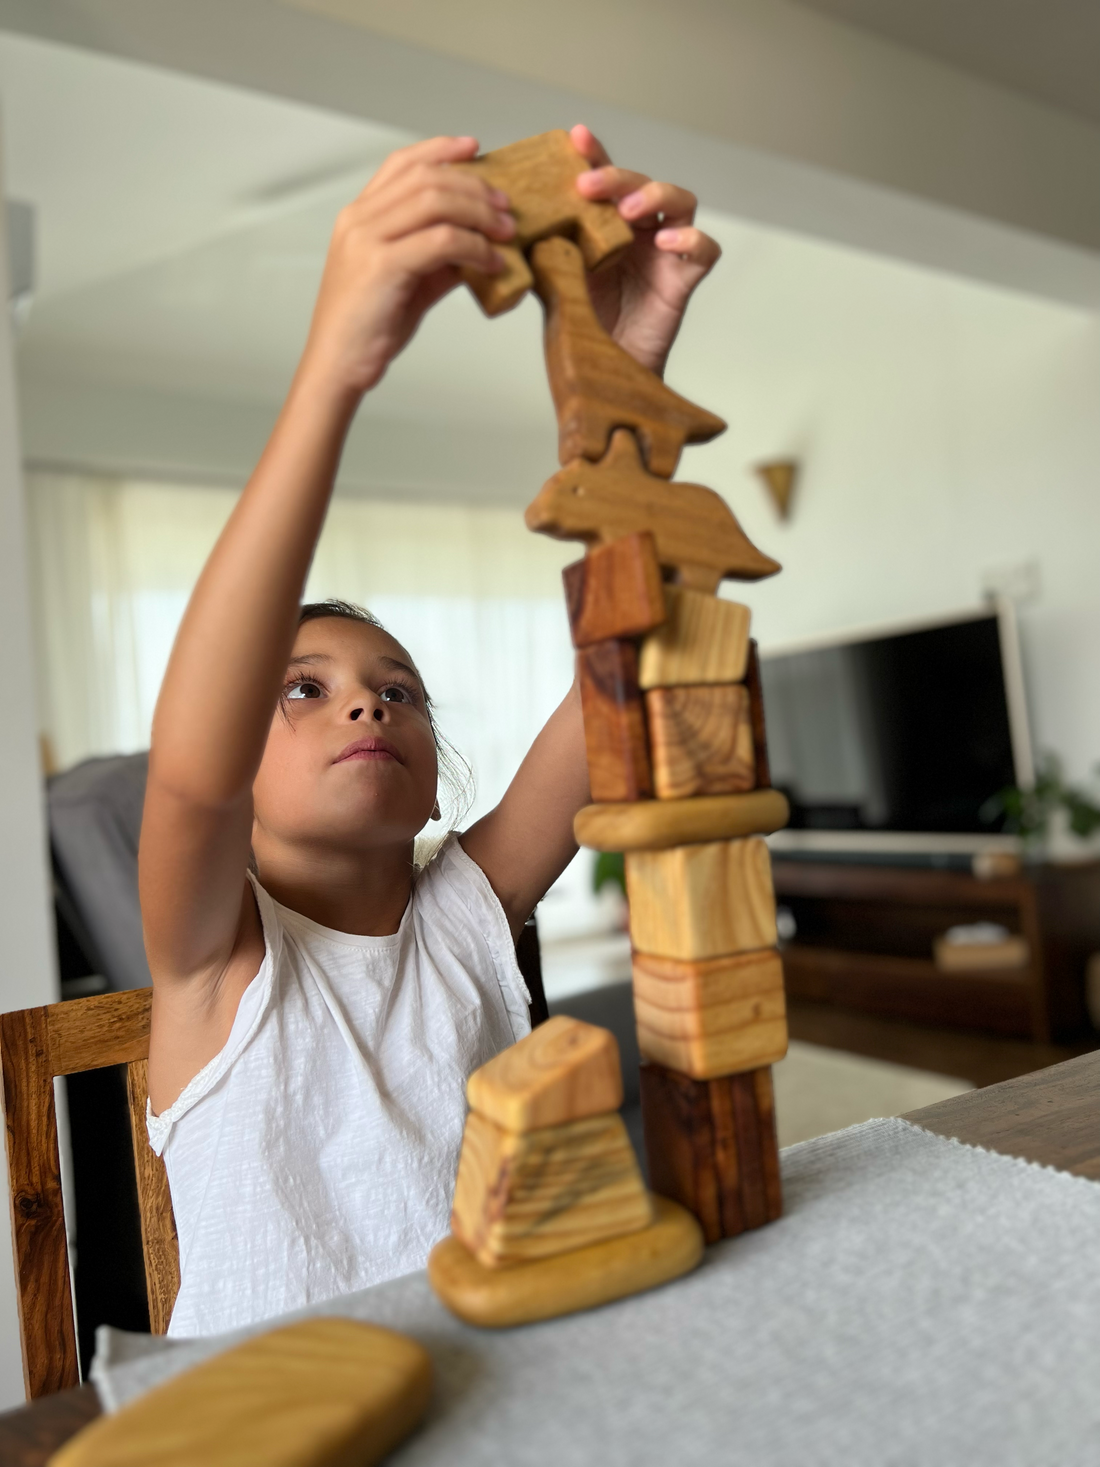 The Biodegradable Advantage of Wooden Toys